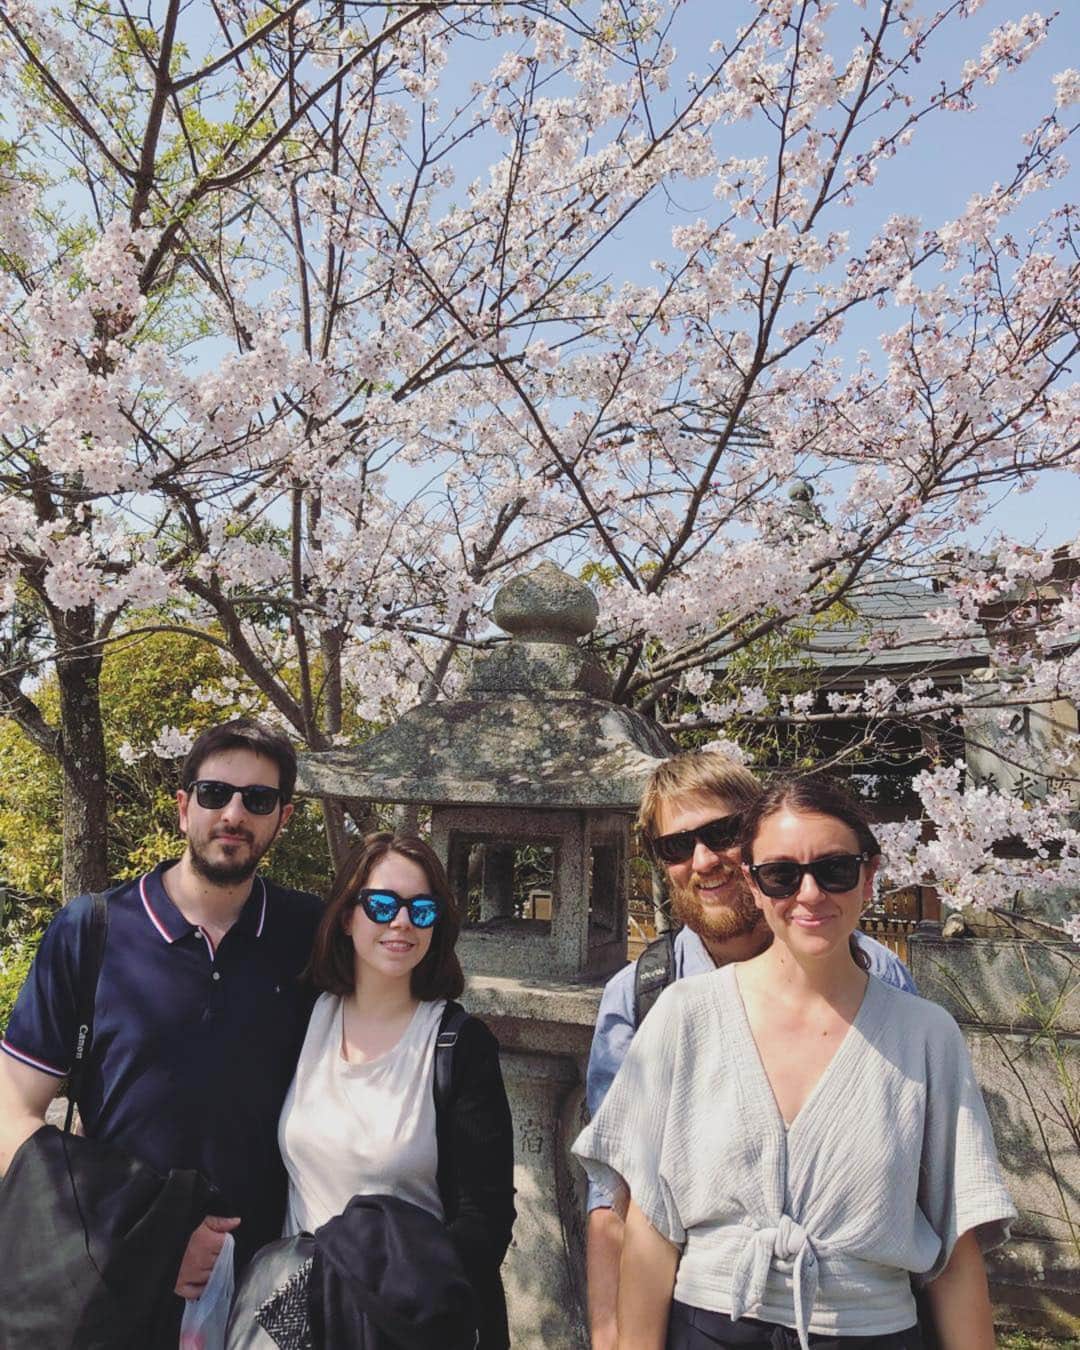 MagicalTripさんのインスタグラム写真 - (MagicalTripInstagram)「Welcome to @Magicaltripcom ⠀⠀⠀ “Travel Deeper with a Local Guide!” ⠀⠀⠀ -------------------------------------------------⠀⠀⠀ Tea Ceremony Experience in Kyoto!⠀ The Japanese Tea Ceremony is a ritual in which tea is prepared and served, and it's considered one of the classical Japanese arts.⠀ 🍵：Kyoto Tea Ceremony & Kiyomizu-dera Temple Walking Tour⠀ 📷：Magical Trip Guide Yuto⠀ -------------------------------------------------⠀⠀⠀ 【🌀What is #Magicaltrip 🌀】⠀⠀⠀ *⠀⠀⠀ Unique travel experiences with local guides in Japan! 🇯🇵🇯🇵⠀⠀⠀ Our local guides will take you to the local and hidden places in Japan!⠀⠀⠀ *⠀⠀⠀ Why don’t you make your special travel experience more unique and unforgettable with us? ⠀⠀⠀ *⠀⠀⠀⠀⠀ 【😎Tour Information😎】⠀⠀⠀ Please check out our unique tours in Japan👇👇⠀⠀⠀ *⠀⠀⠀ *⠀⠀⠀ Bar Hopping tours🍶in Tokyo, Osaka, Kyoto, and Hiroshima, discovering the local izakaya in Japan! 🍻🍻⠀⠀⠀ *⠀⠀⠀ Food tours are not all about sushi🍣but also Japanese traditional food such as okonomiyaki, oden, sashimi, yakitori 😋😋⠀⠀⠀ *⠀⠀⠀ Cultural-Walking tours🍀in Asakusa, Nakano, Akihabara, Tsukiji, Togoshiginza, Yanaka, Ryogoku, where you can dive into the deep Japanese cultures! 🚶🚶⠀⠀⠀ *⠀⠀⠀ Explore Tokyolife with cycling tour🚴🚵, club-patrol💃, Karaoke night🎤 and sumo tour! 👀👀⠀⠀⠀ *⠀⠀⠀ *⠀⠀⠀ *⠀⠀⠀ ⭐️Book our tours on the link of @Magicaltripcom profile page! ⠀⠀⠀ *⠀⠀⠀ #japan #japantrip #japantravel #japantour #kyototrip #kyototravel #greentea #japanesetea #visitkyoto #lovekyoto #japaneselocal #kyotofoodie #japanfood #ilovejapan #teaceremony #discoverjapan #visitjapan #japanesevegan #sakekanpai #kimono #kimonostyle #magicaltripcom #kiyomizutemple #kiyomizu #japaneseactivity #kyototour #japantour #kyotoexperience #lovekyoto」4月24日 20時35分 - magicaltripcom